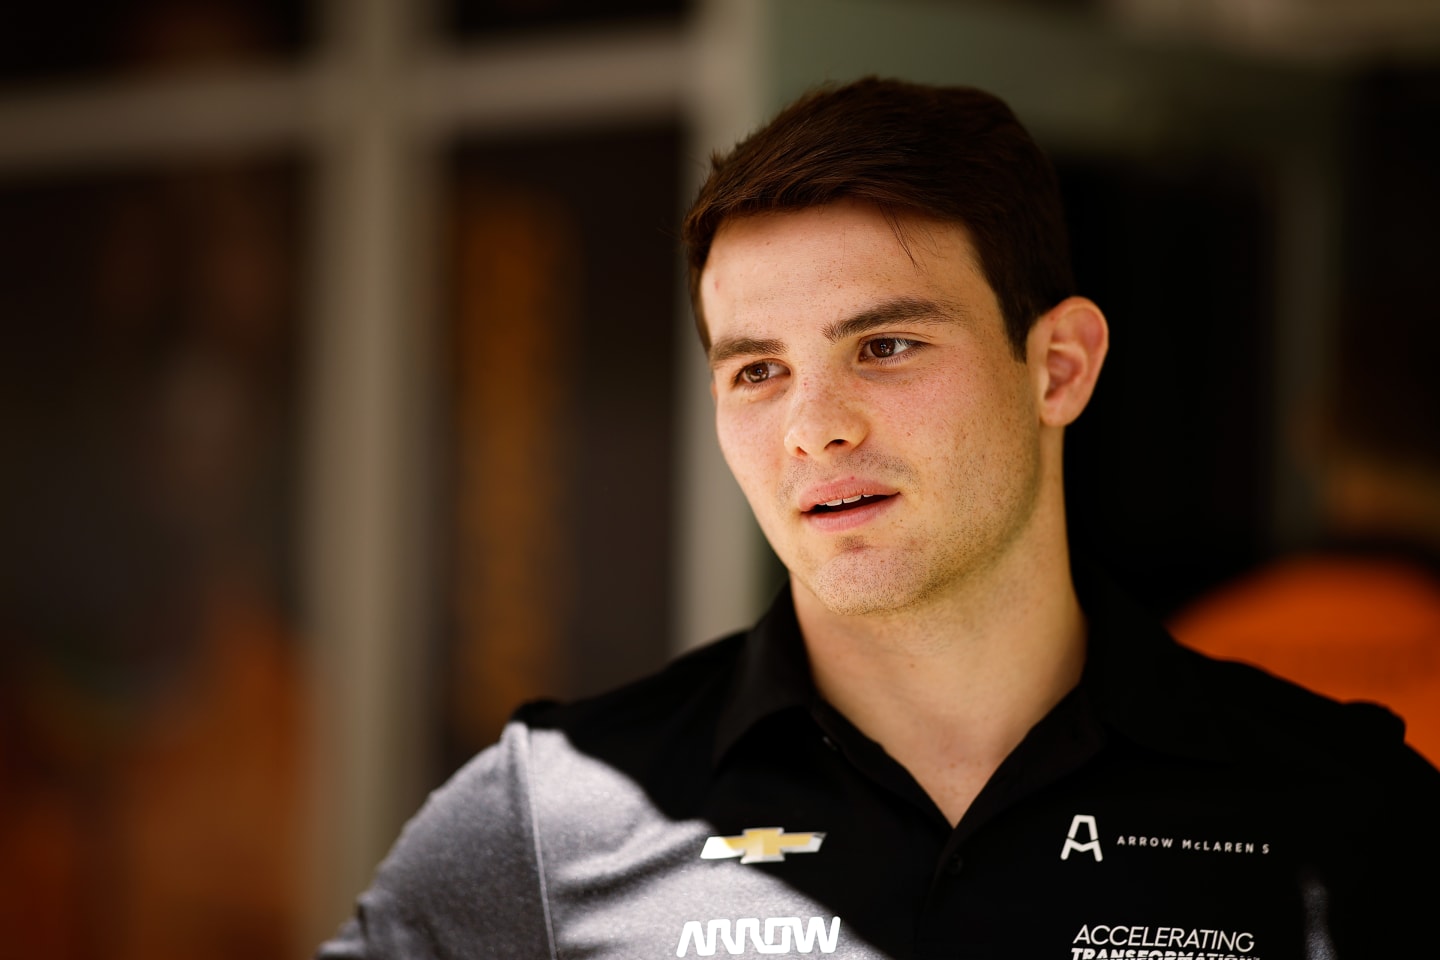 AUSTIN, TEXAS - OCTOBER 20: Pato O'Ward of Mexico and McLaren looks on in the Paddock during previews ahead of the F1 Grand Prix of USA at Circuit of The Americas on October 20, 2022 in Austin, Texas. (Photo by Chris Graythen/Getty Images)